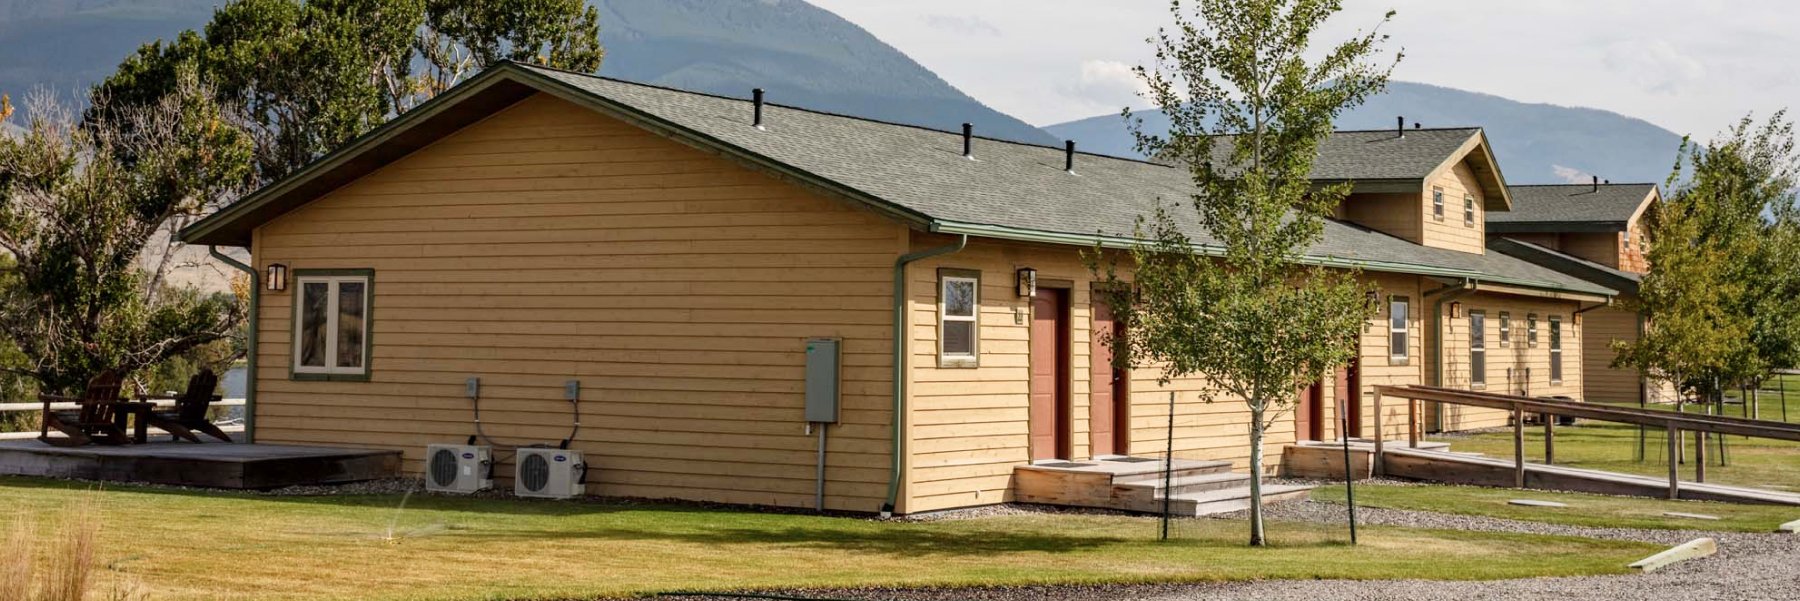 Contact and Location of Yellowstone Valley Lodge & Grill - South Livingston, Montana